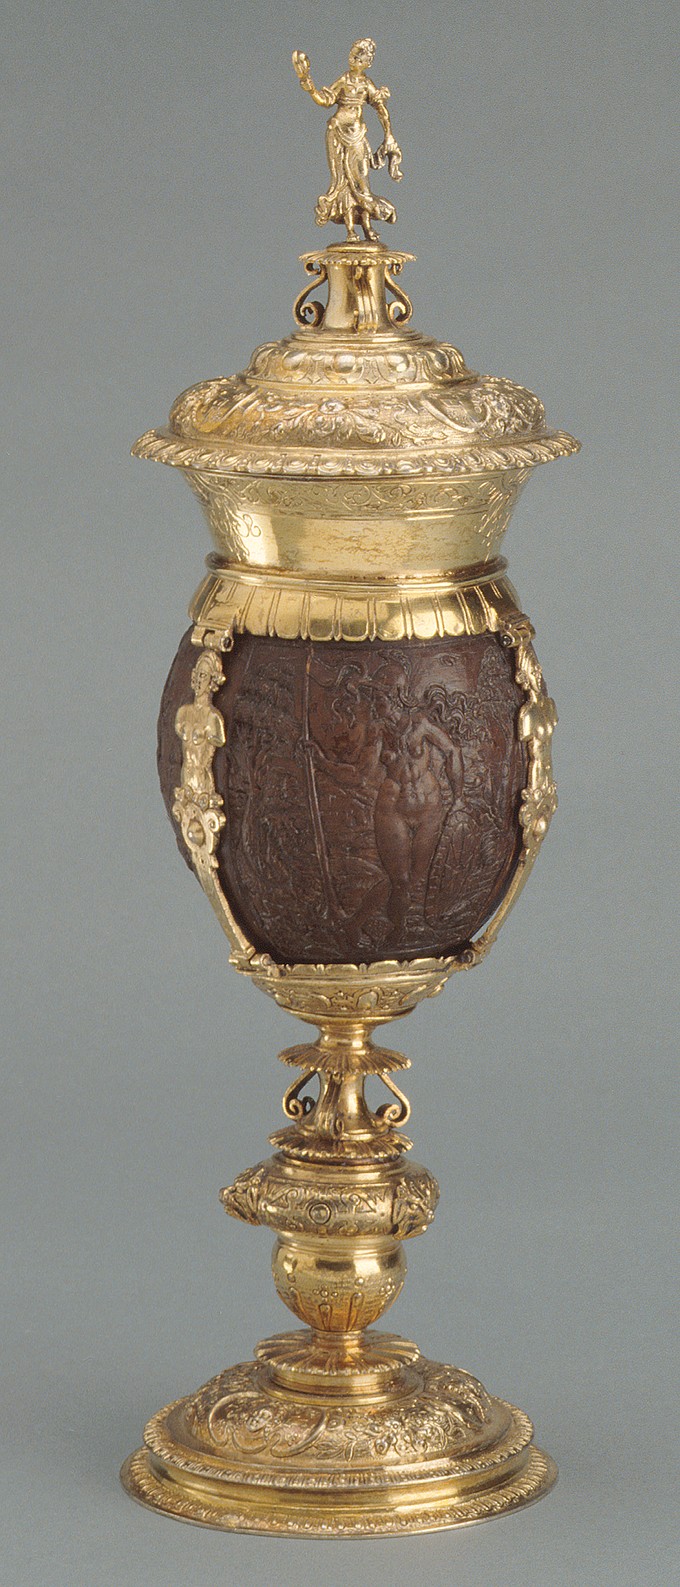 Coconut Cup and Cover: Venus Vulgaris and Chastity separated by Wisdom, and Prudence